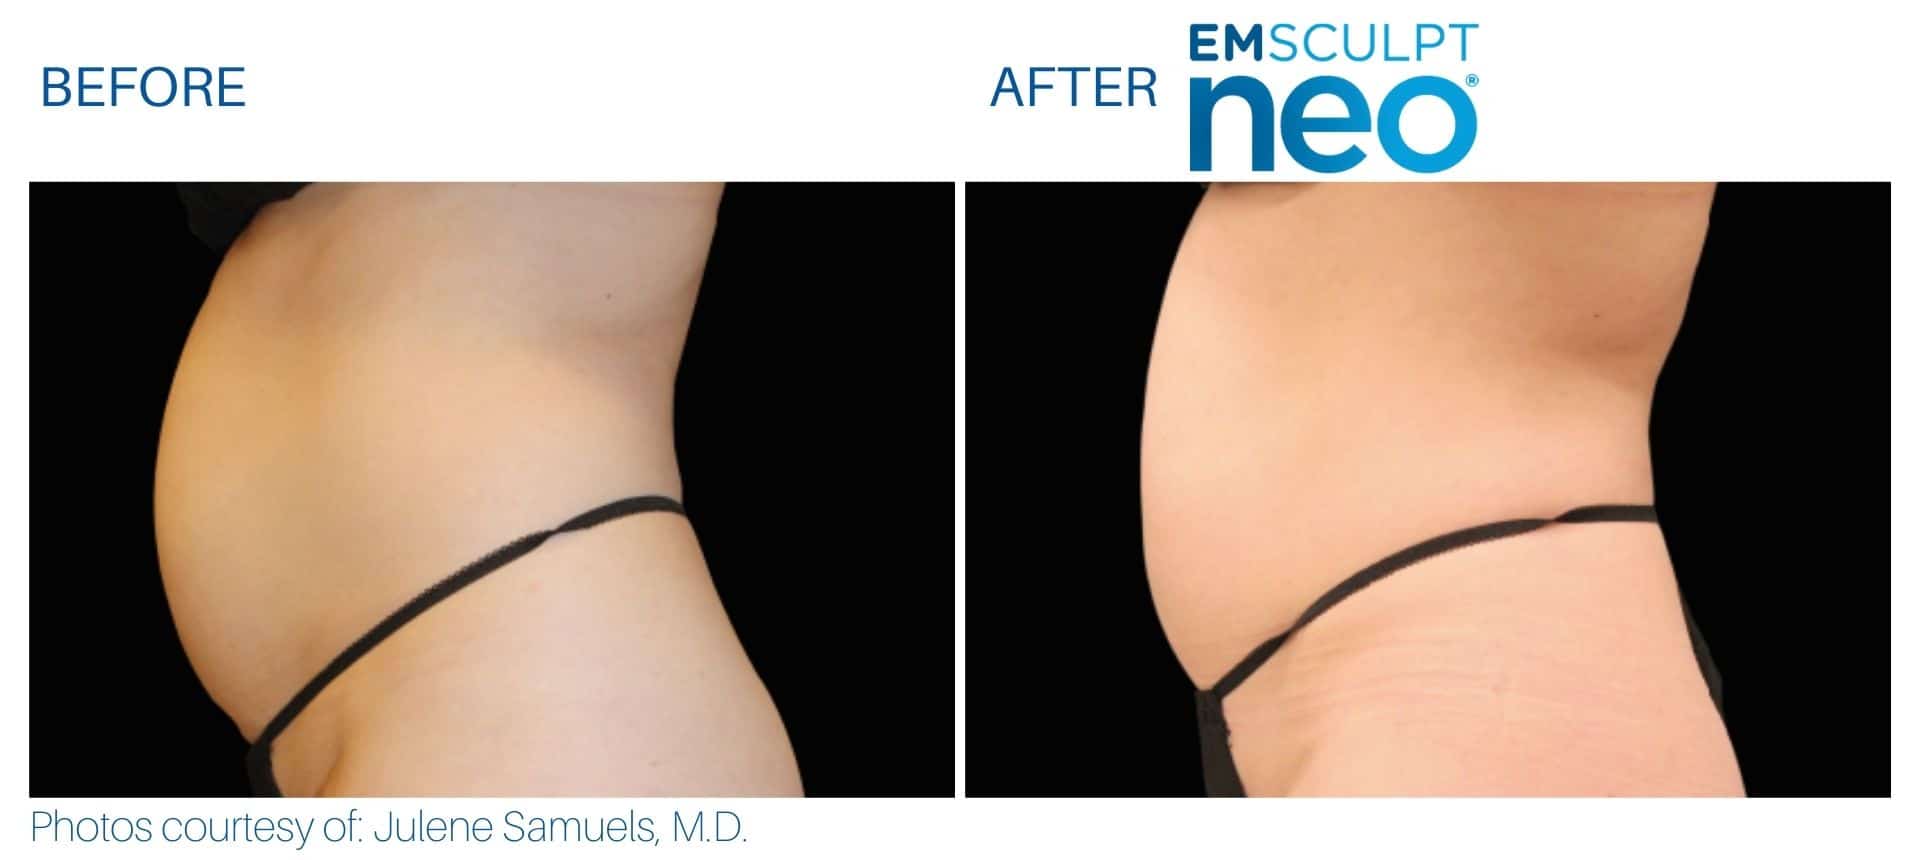 Can EMSCULPT Treat Other Body Areas Besides Abs?